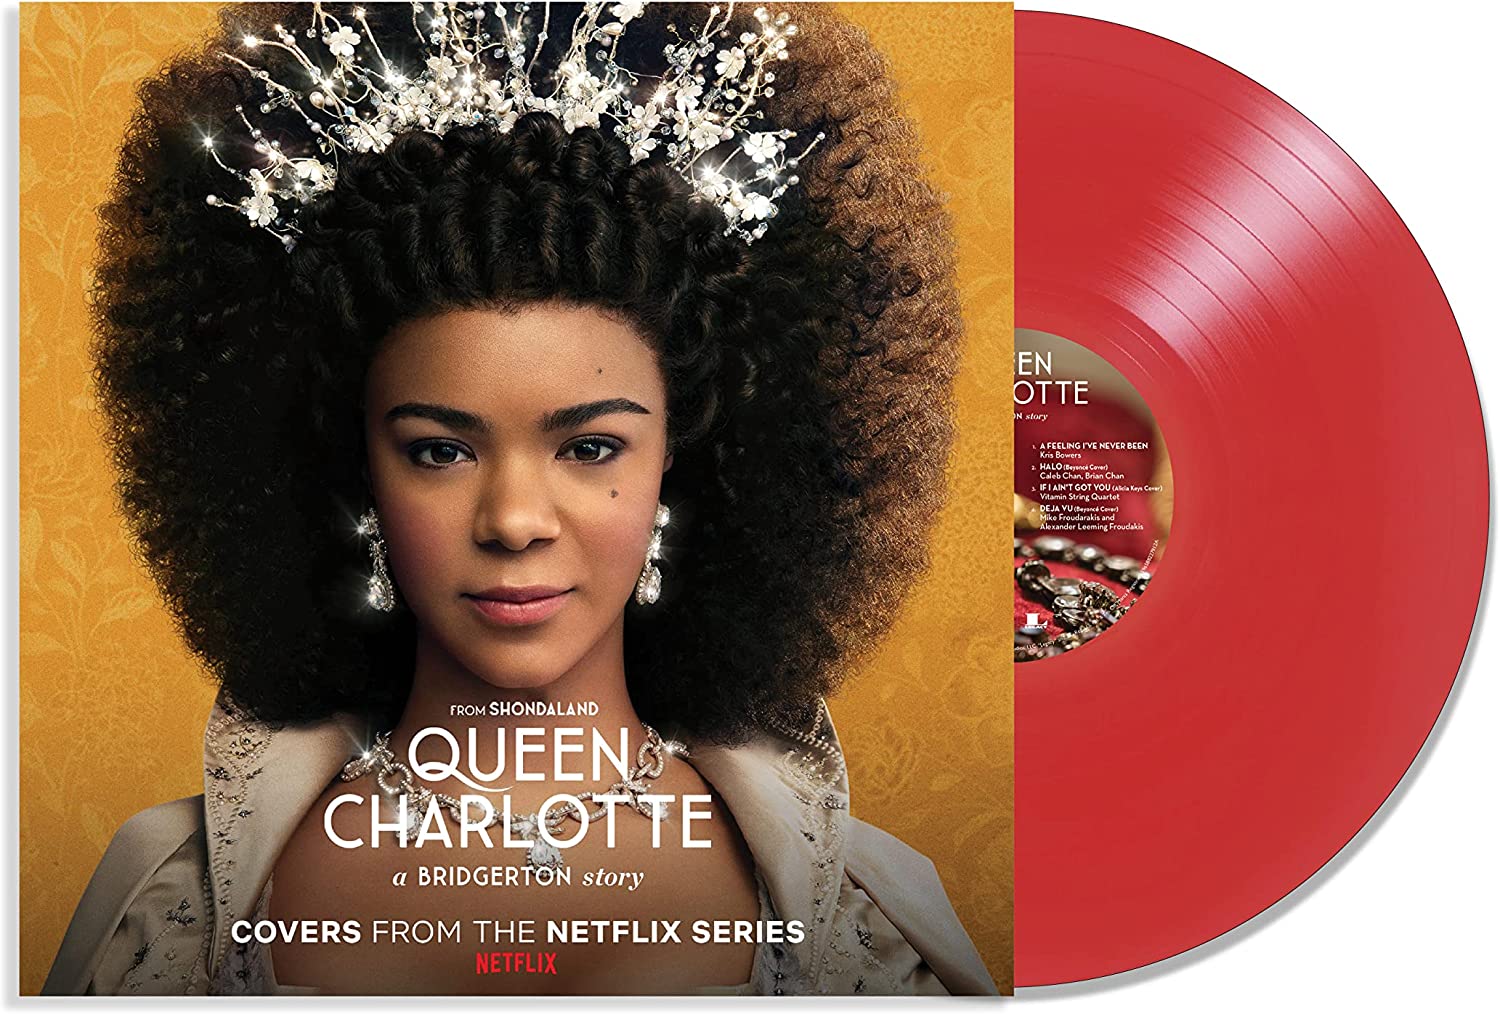 Queen Charlotte: A Bridgerton Story (Covers From the Netflix Series) (Red Vinyl)